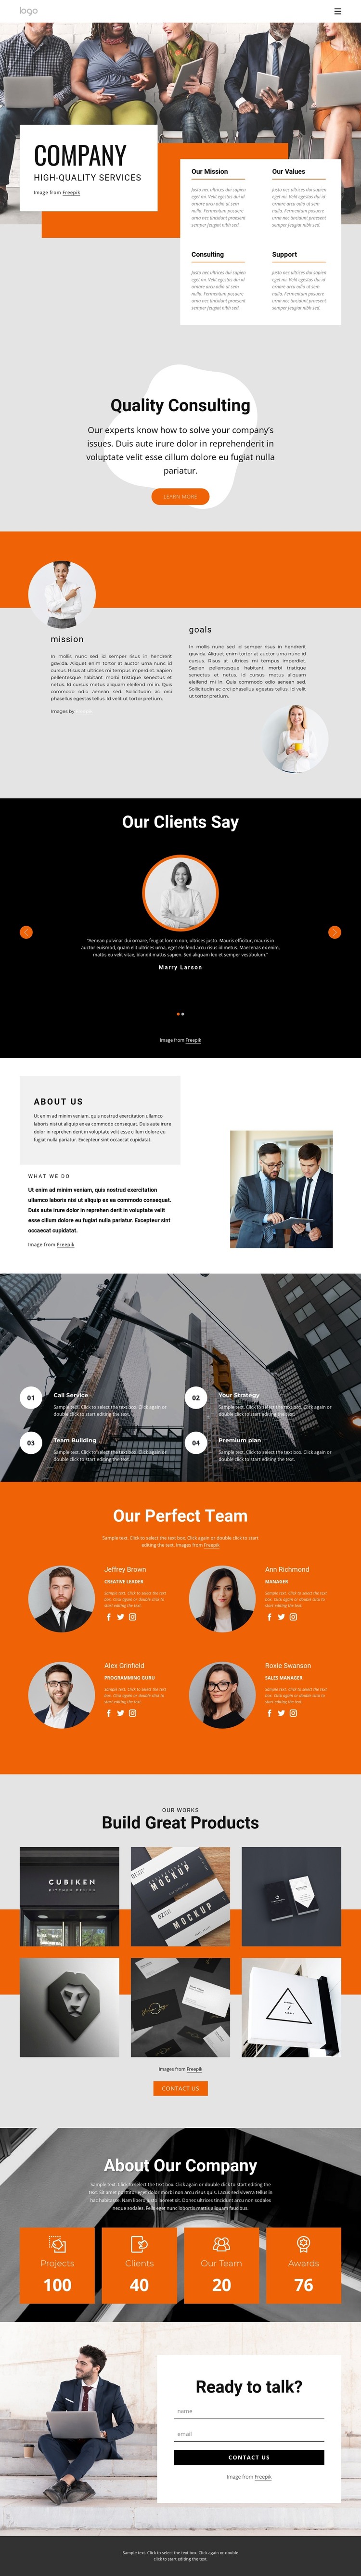 Hight quality consulting firm HTML Template